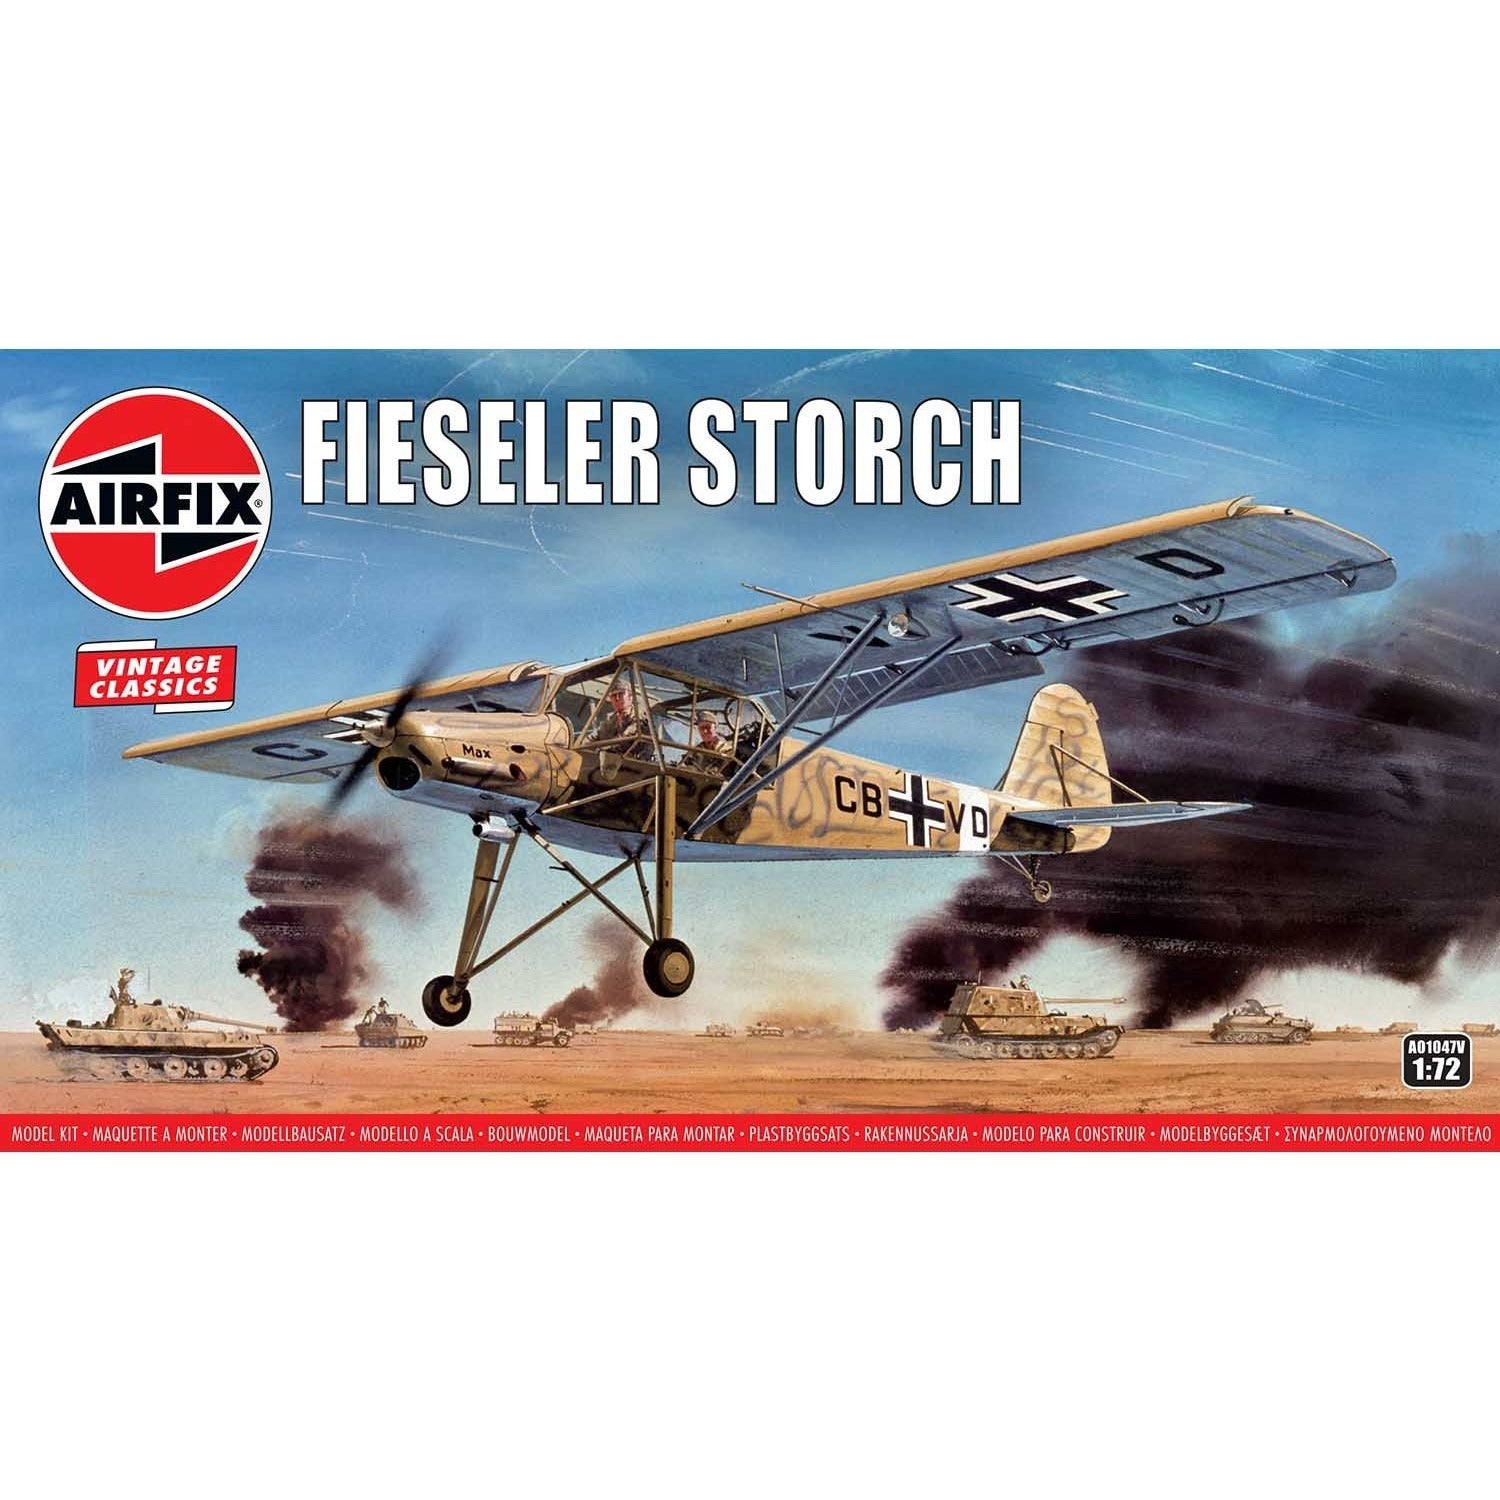 Fiesler Storch 1/72 by Airfix